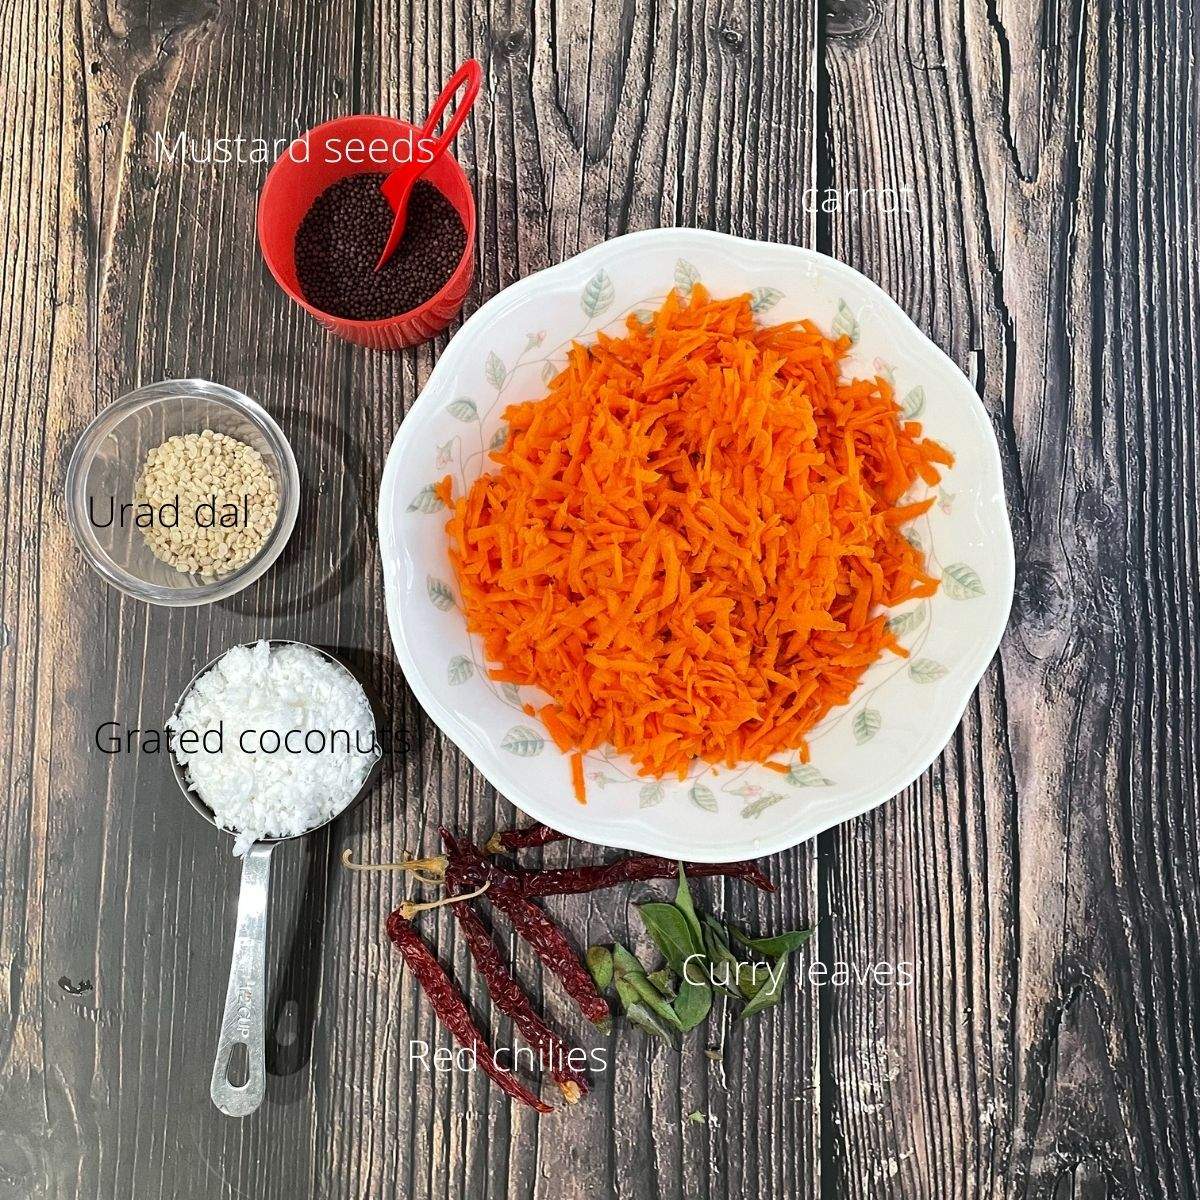 A table is with carrot chutney ingredients like grated carrots, coconuts, and spices.